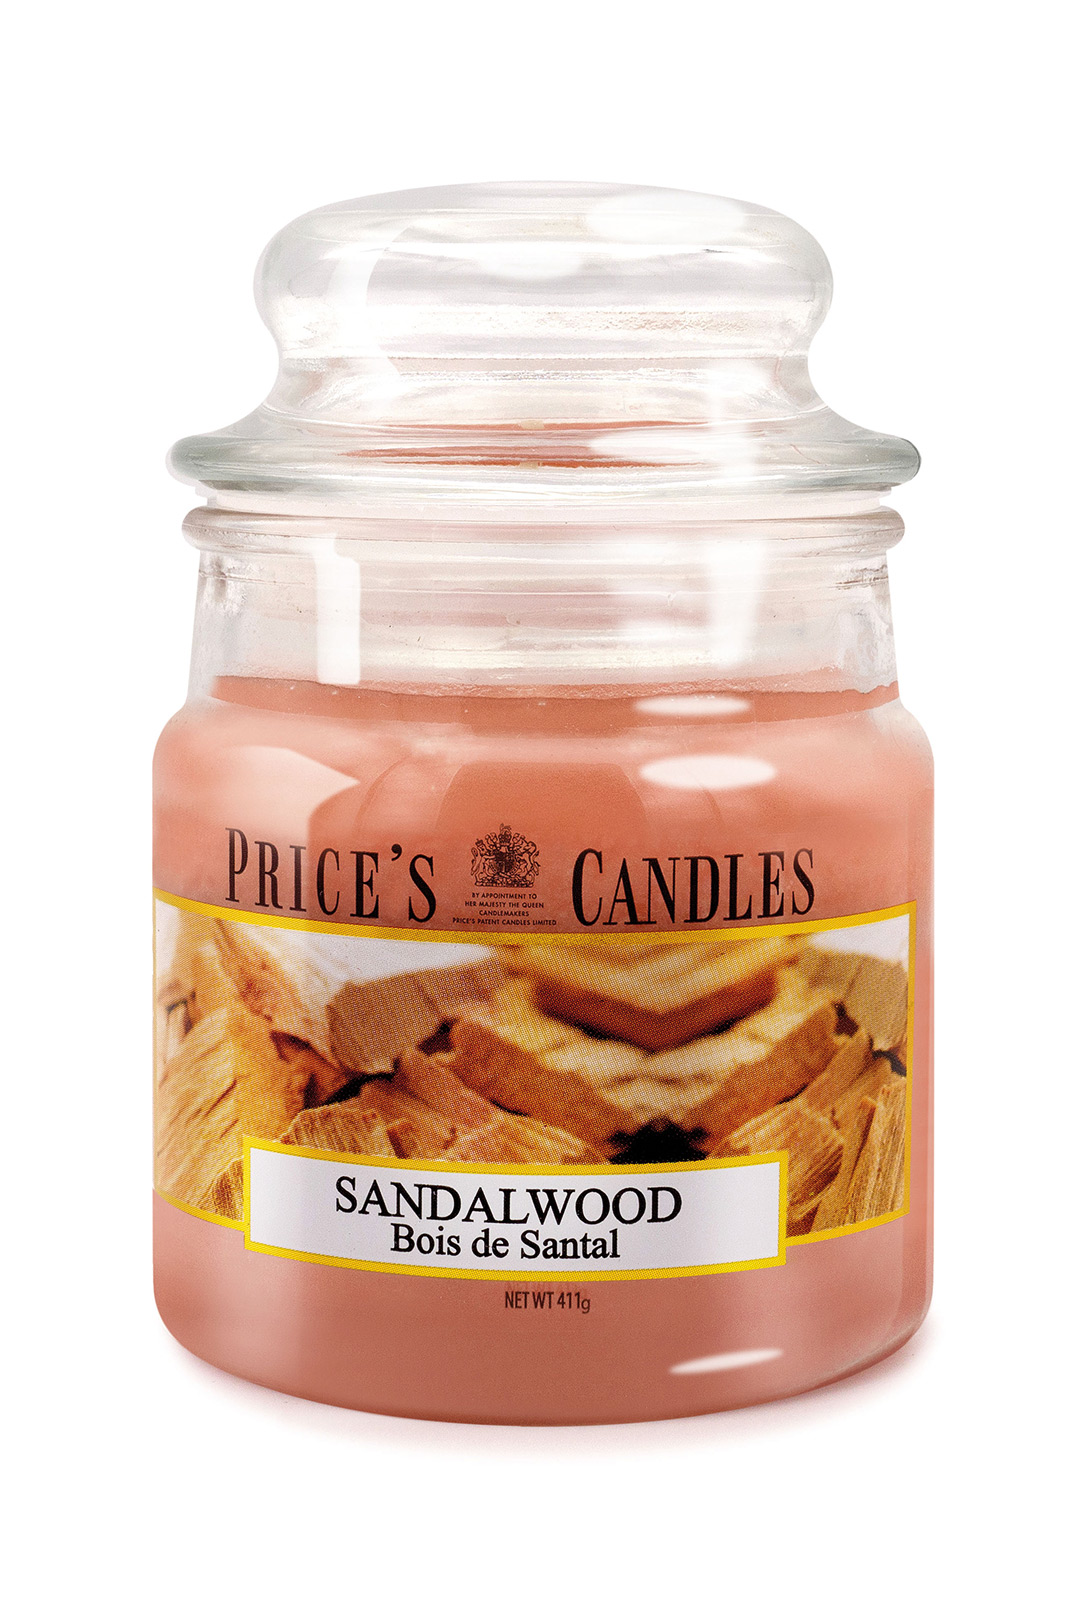 Prices Candle "Sandalwood" 100g 